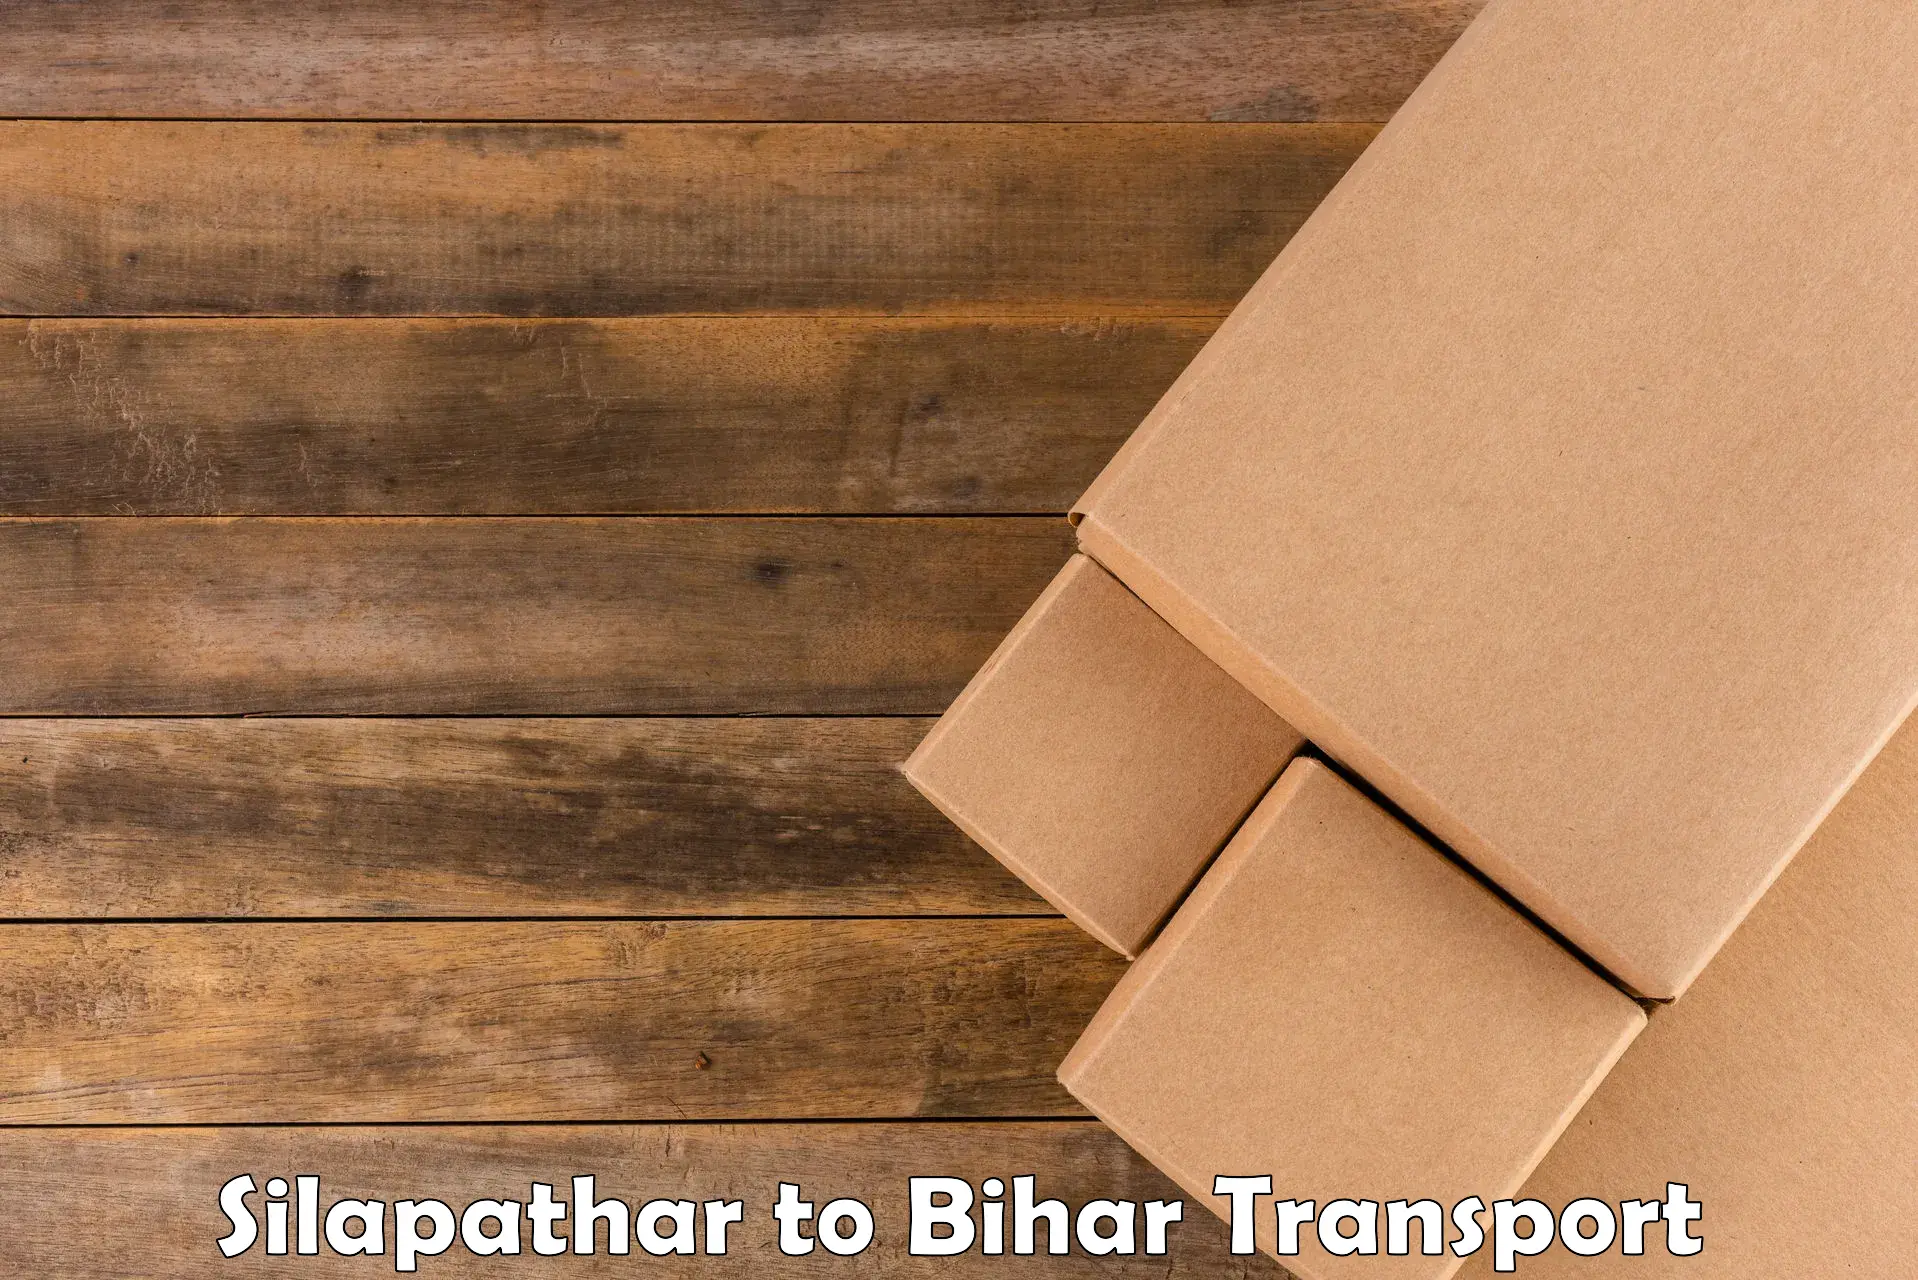 Pick up transport service Silapathar to Araria